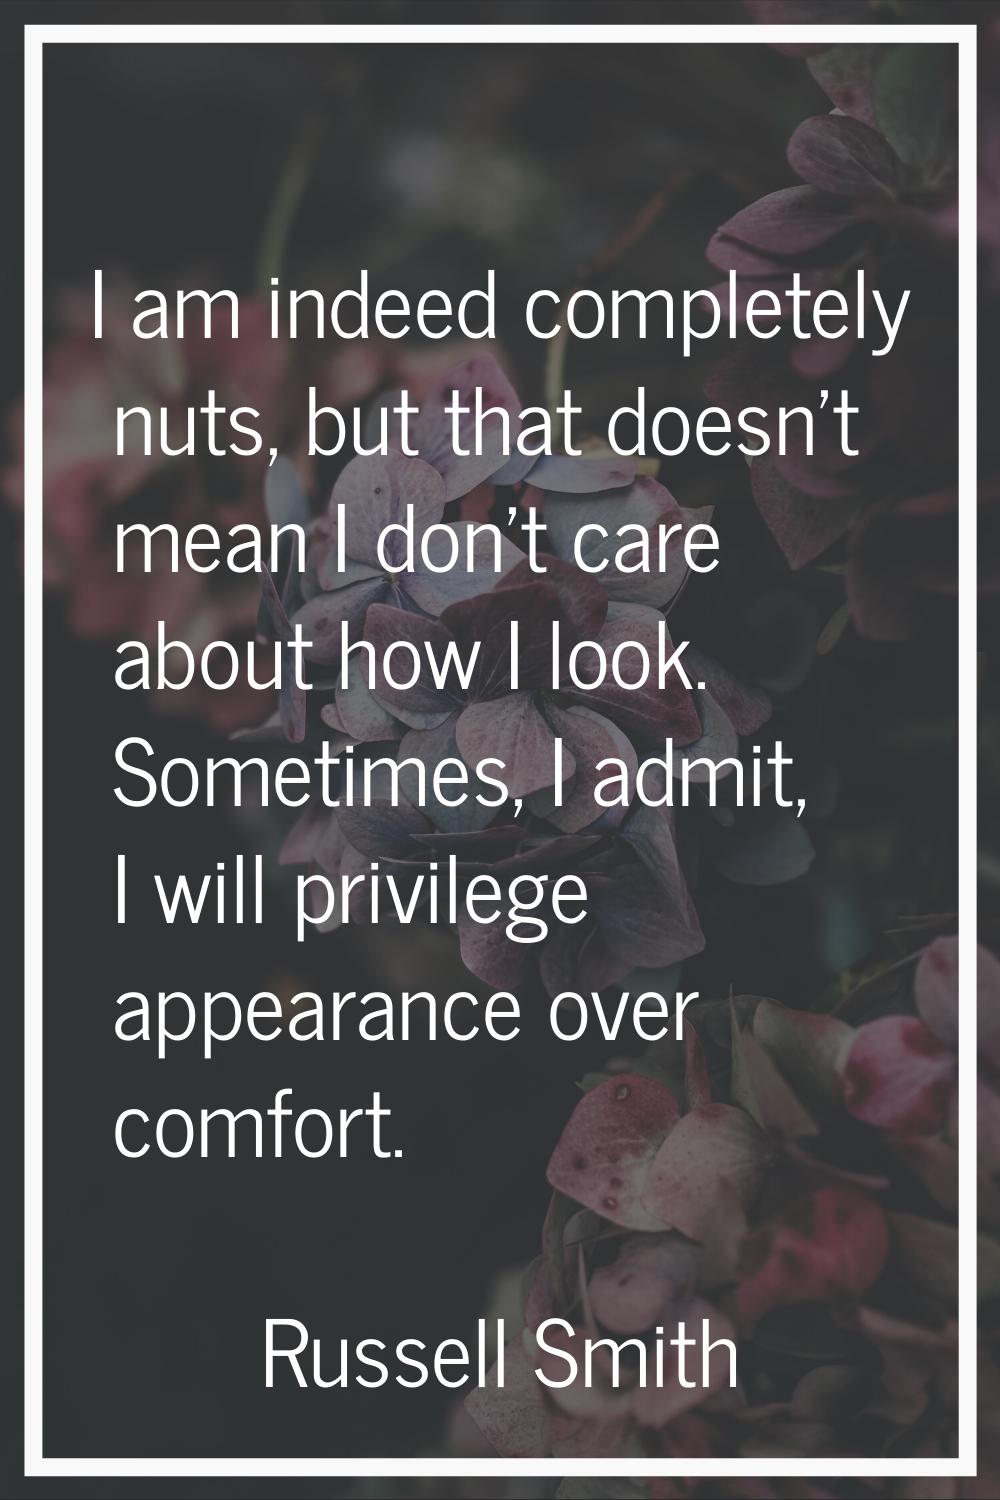 I am indeed completely nuts, but that doesn't mean I don't care about how I look. Sometimes, I admi